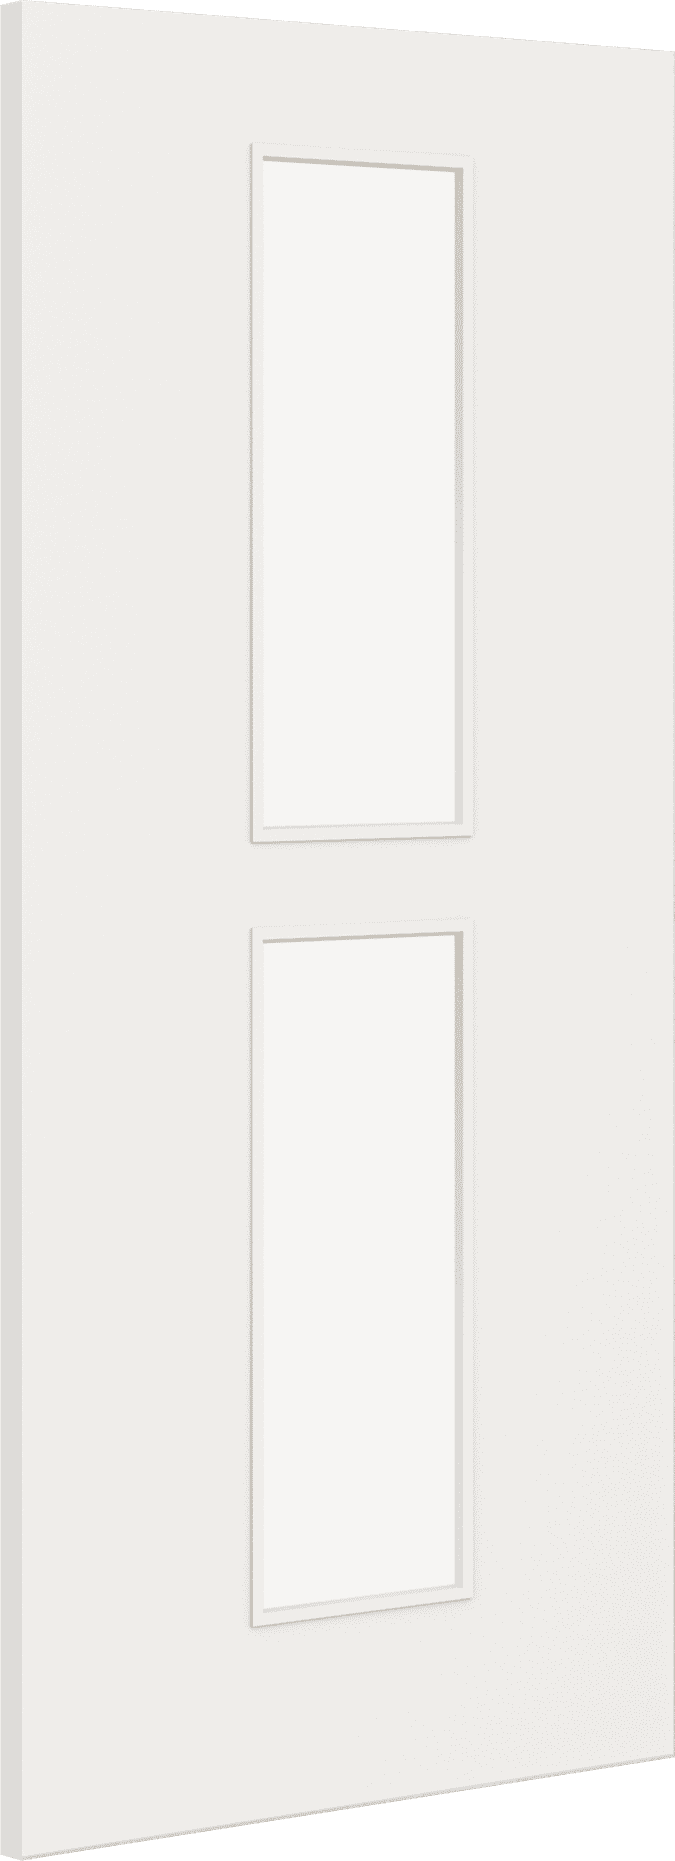 1981mm x 533mm x 44mm (21") Architectural Paint Grade White 12 Frosted Glazed Fire Door Blank